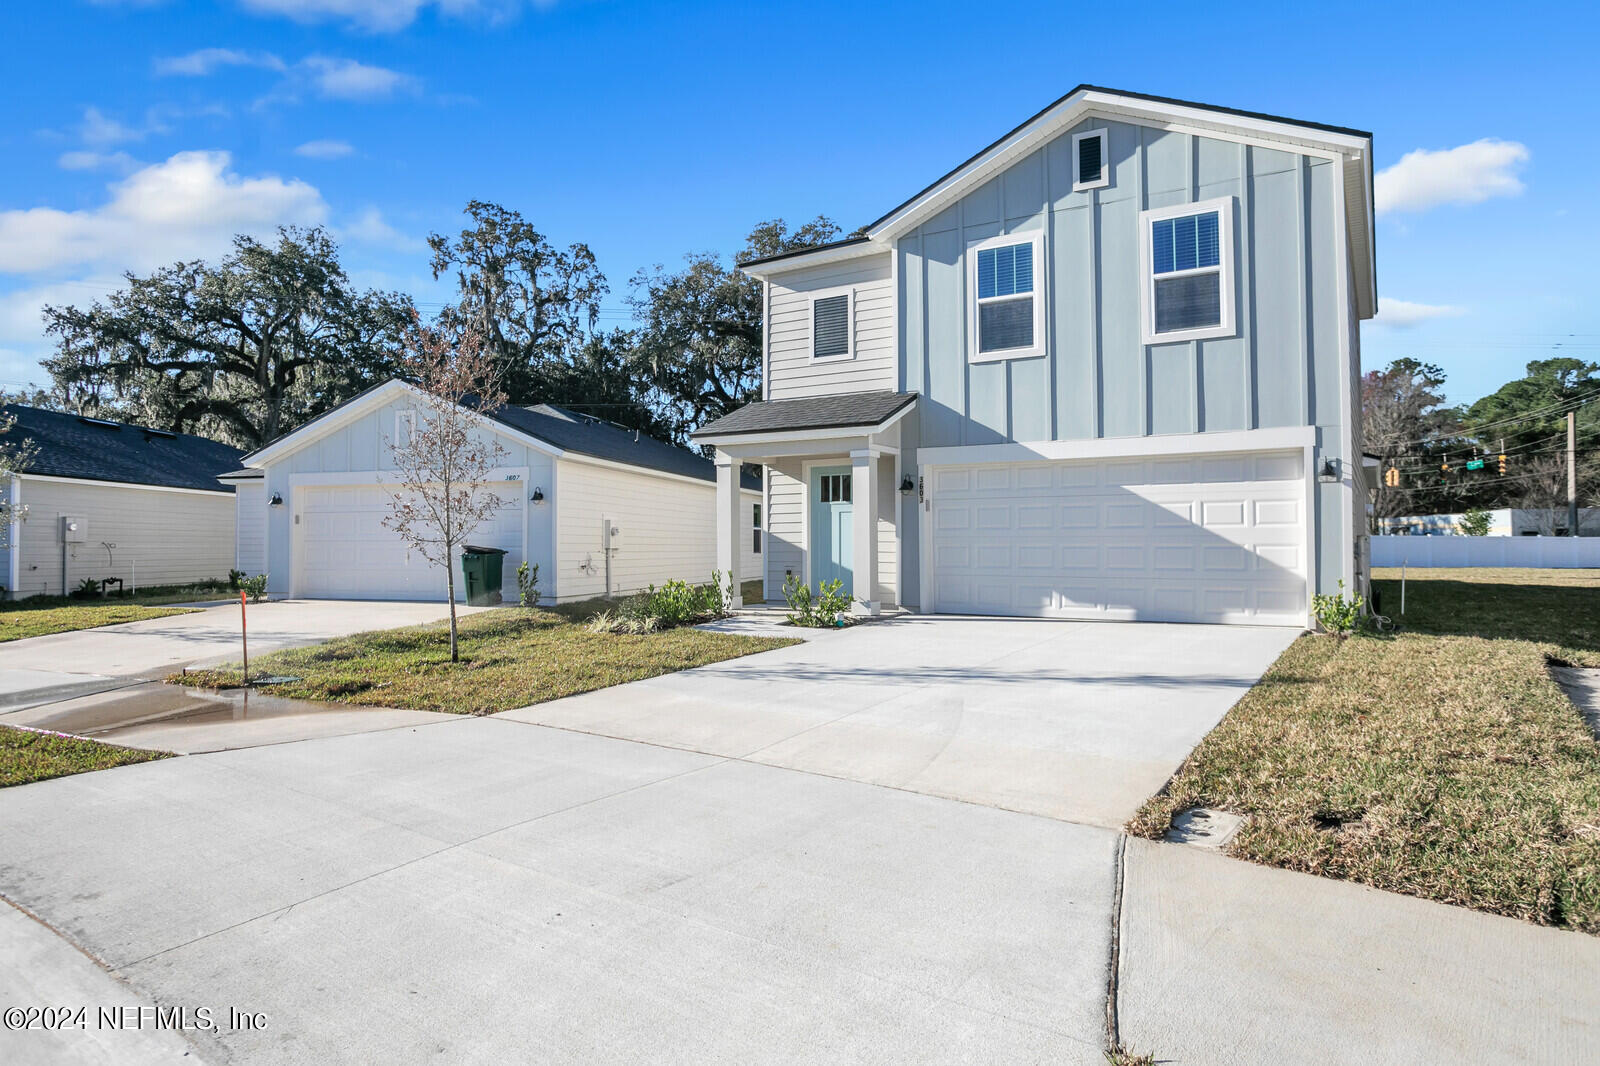 Jacksonville, FL home for sale located at 5232 Sawmill Pt Way Lot 2, Jacksonville, FL 32210